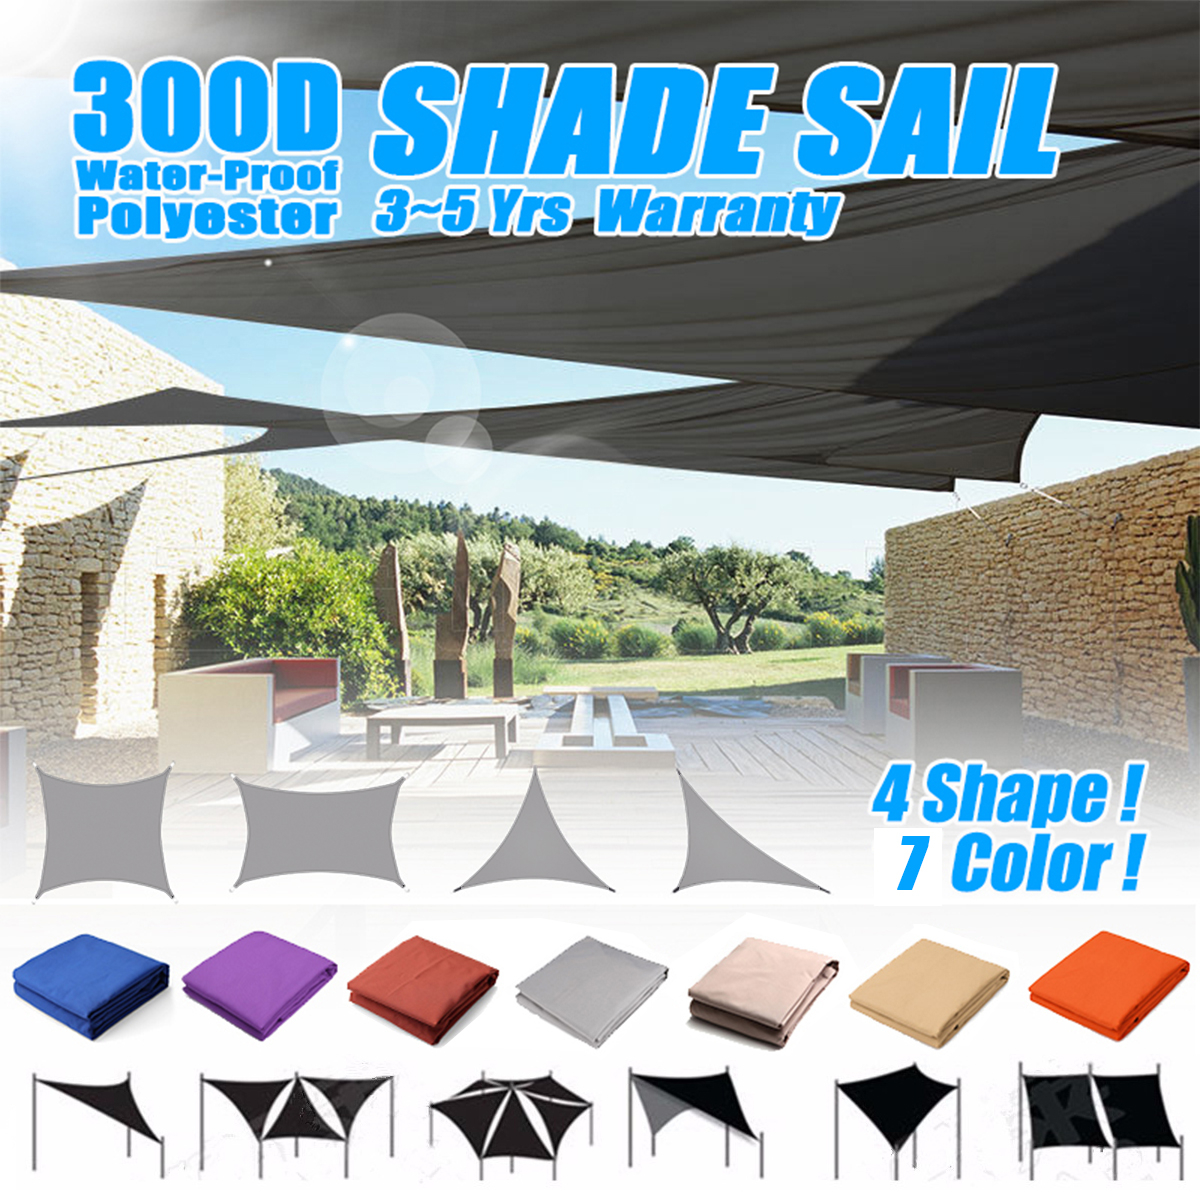 Details About 300d Sun Shade Sail Outdoor Garden Waterproof Awning Canopy Patio Cover Uv Block inside sizing 1200 X 1200